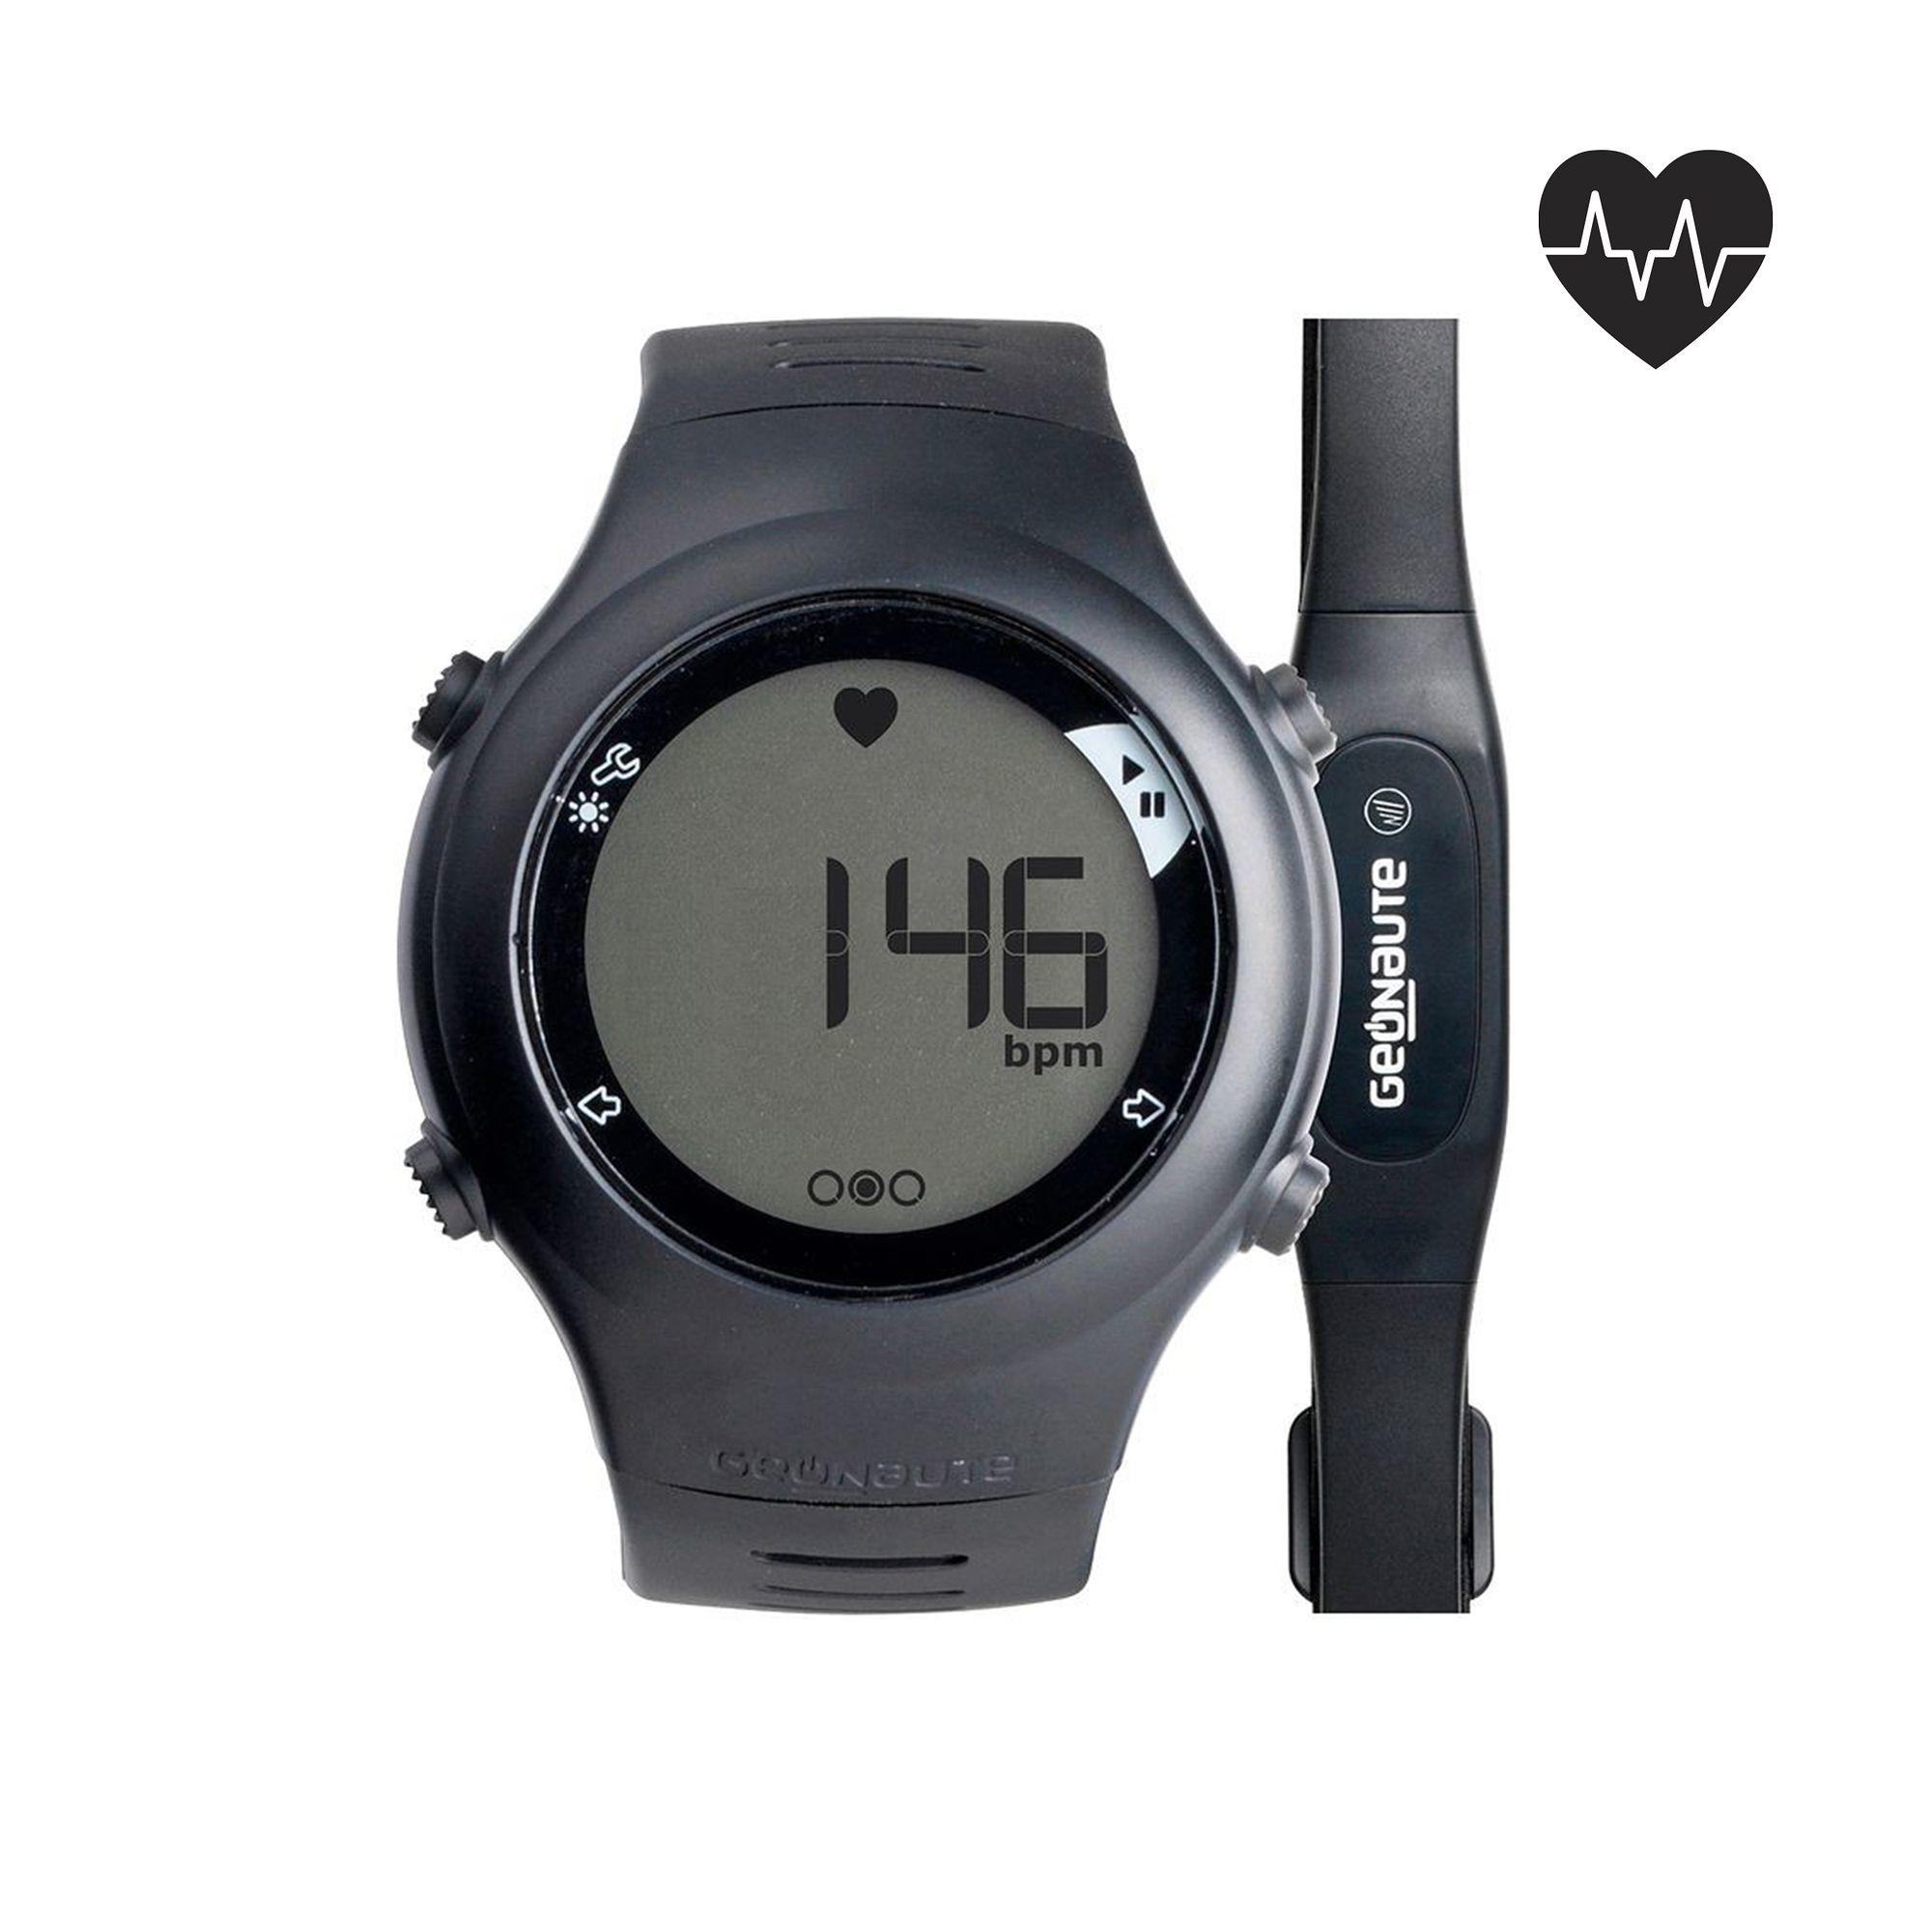 Image of ONrhythm 110 running heart rate monitor watch